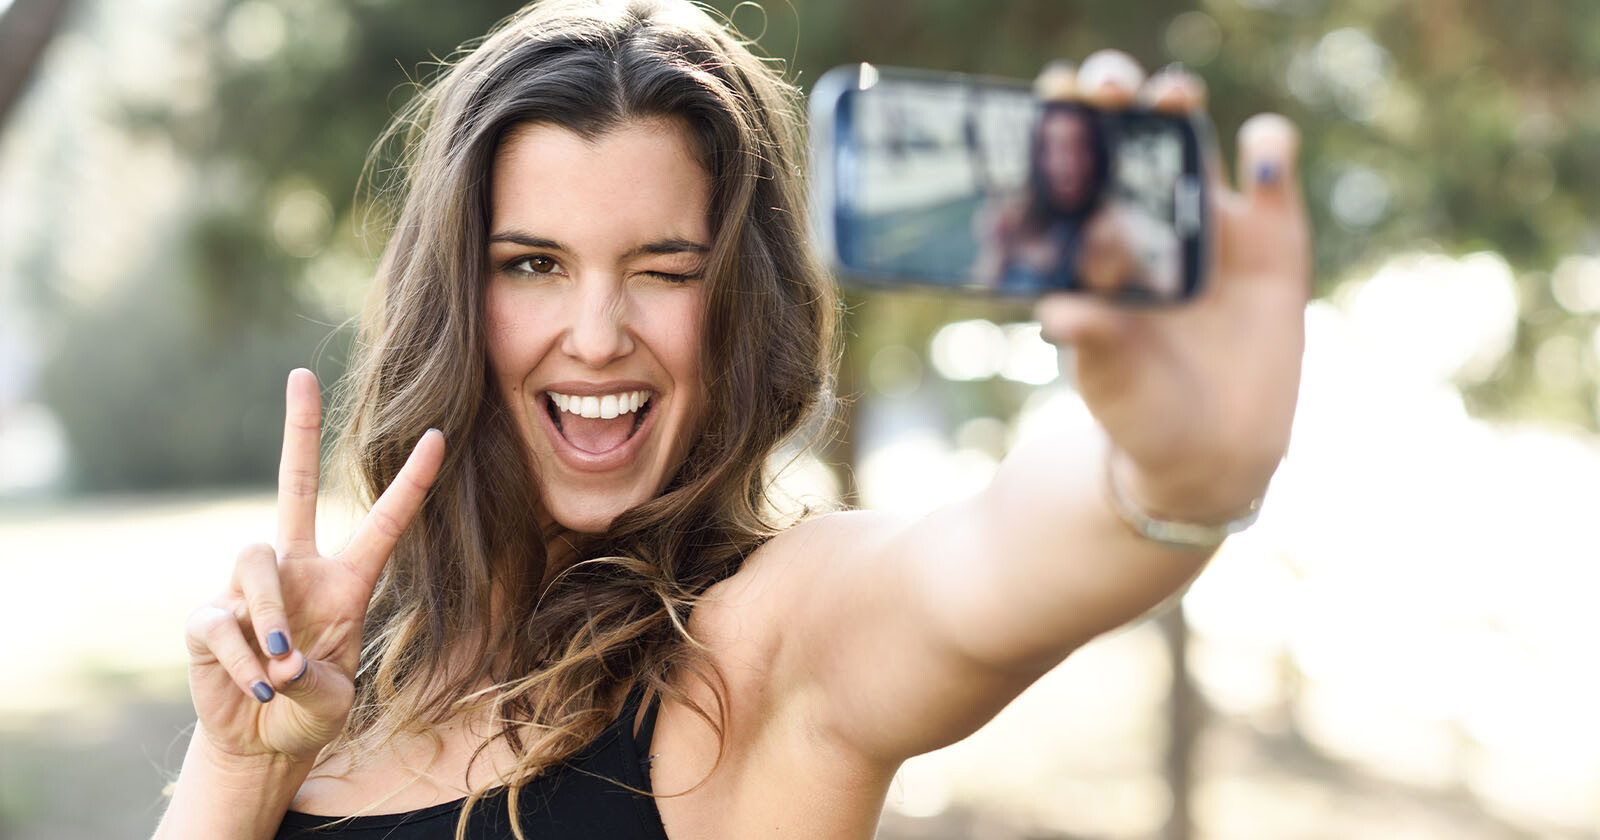 Scientists Explain Why People Love to Take Selfies